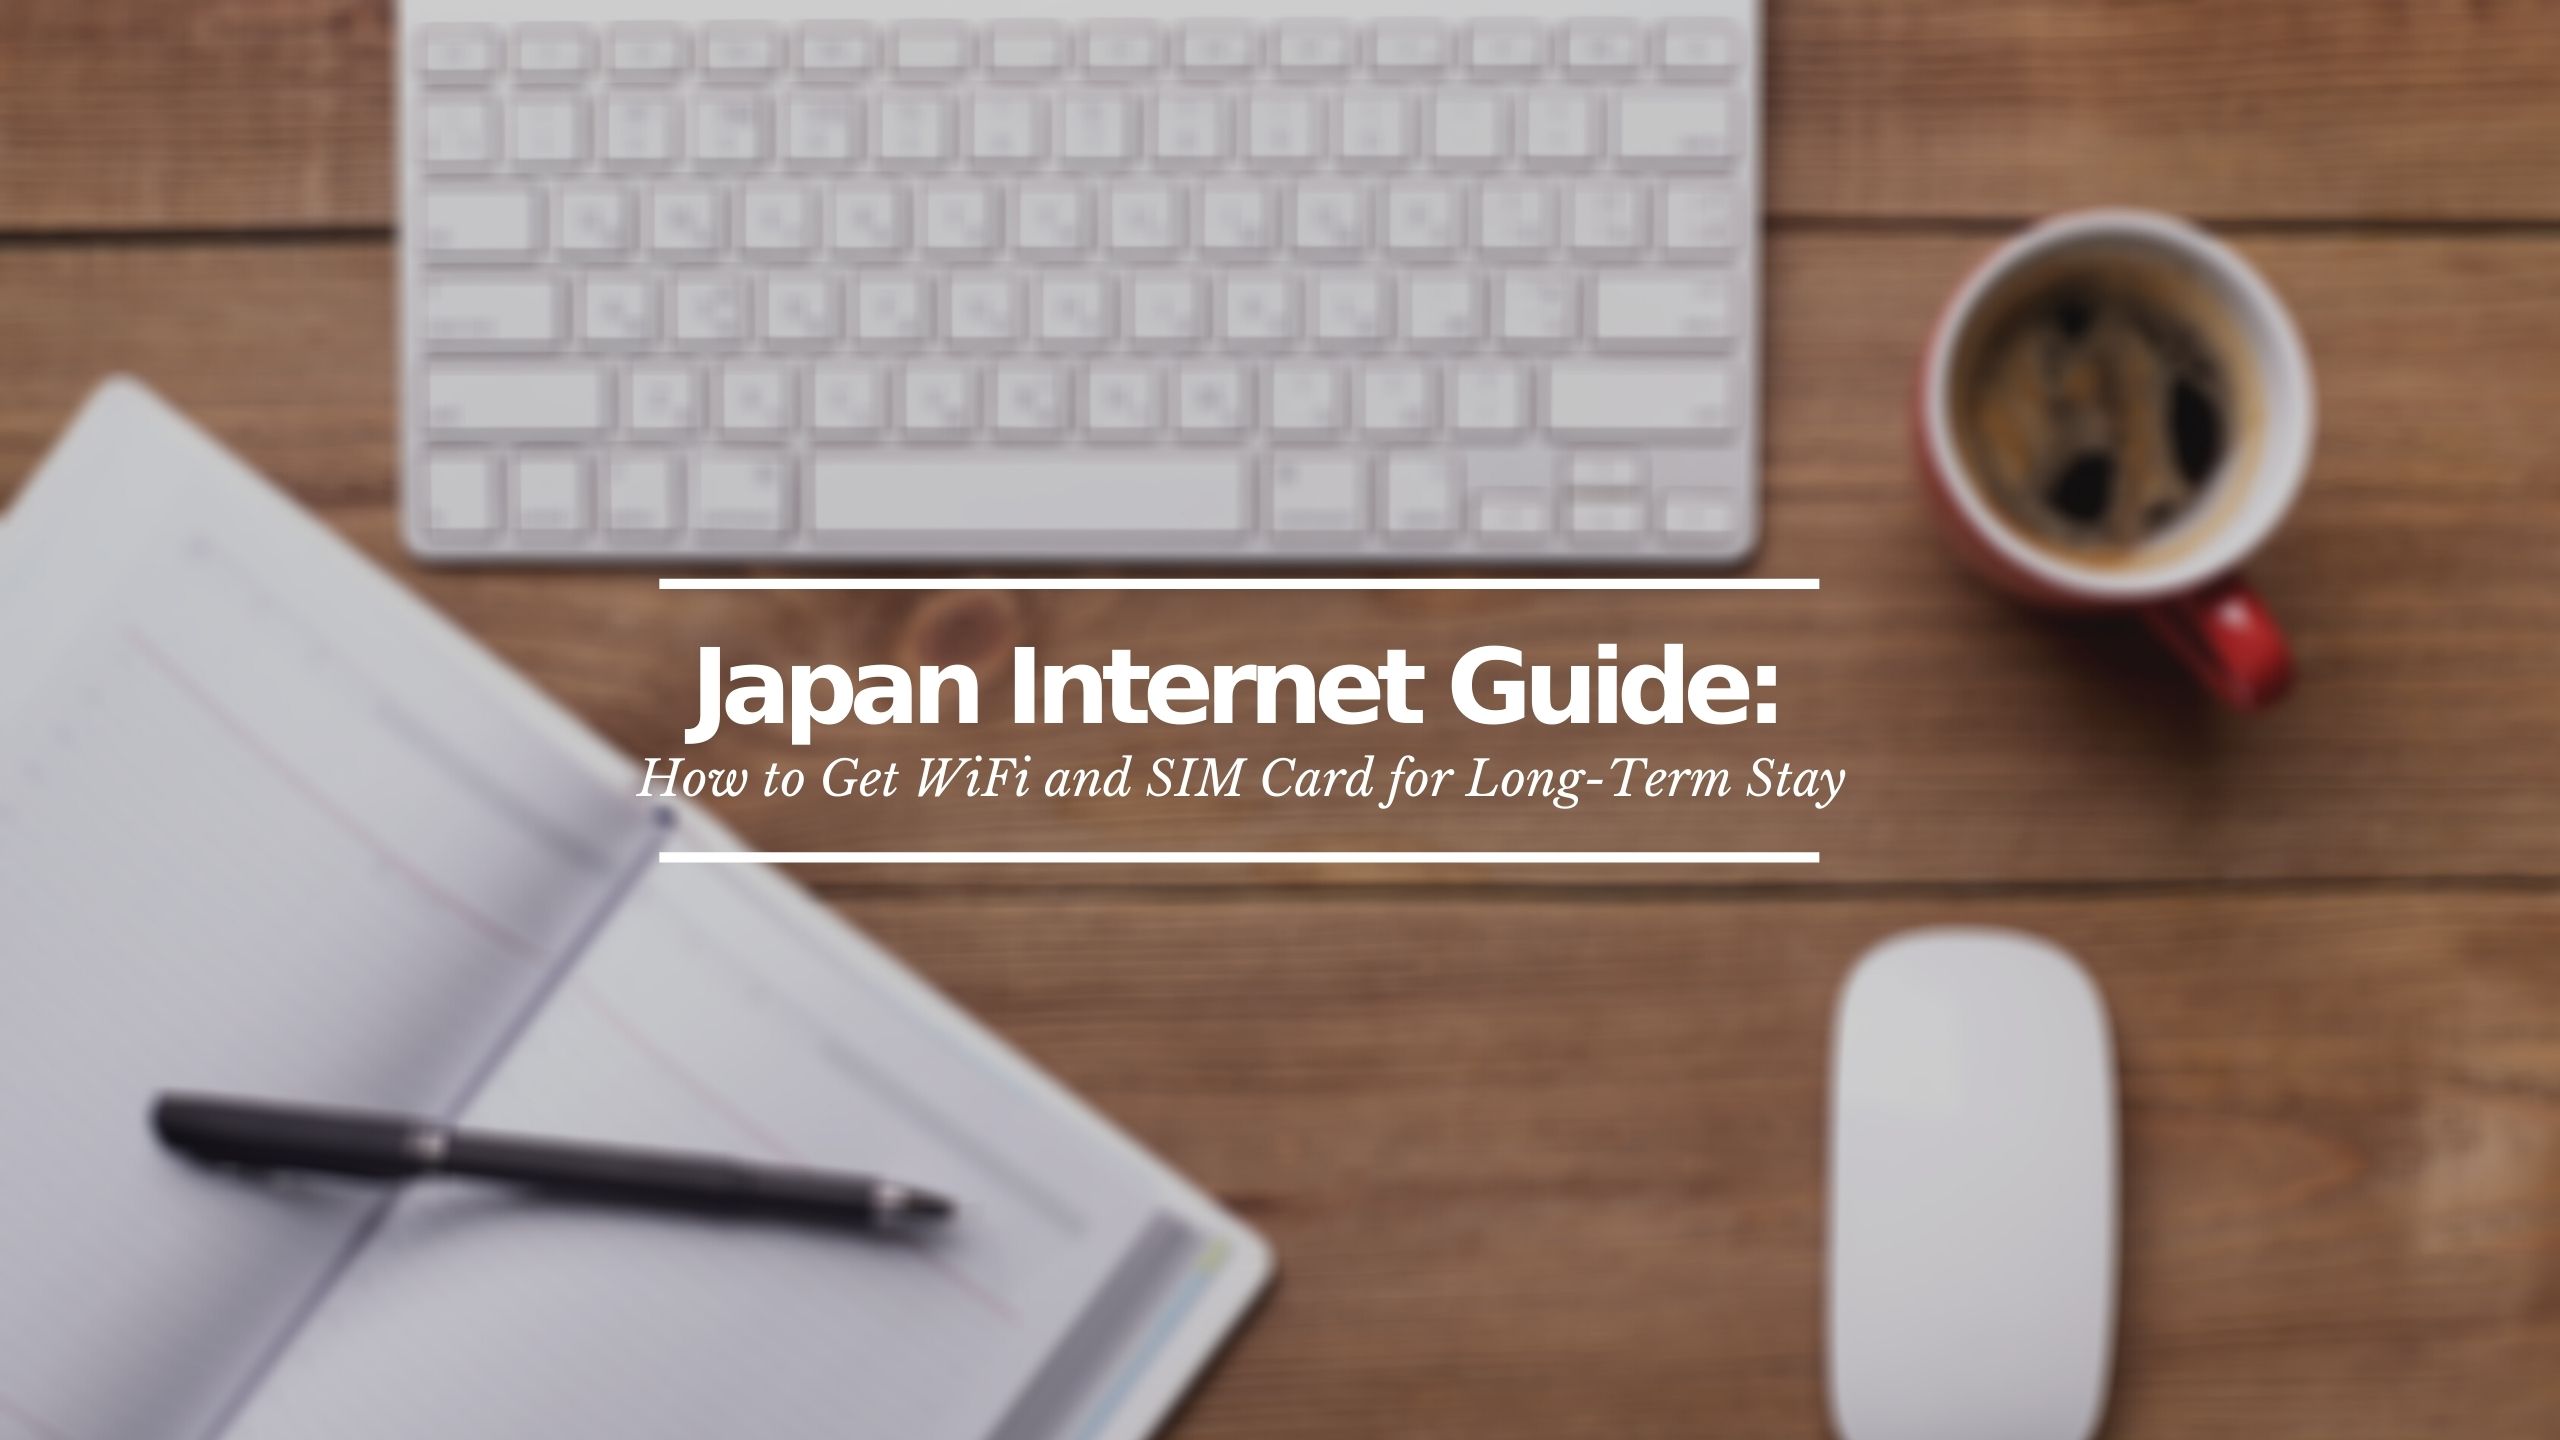 Japan Internet Guide: How to Get WiFi and SIM card for Long-Term Stay